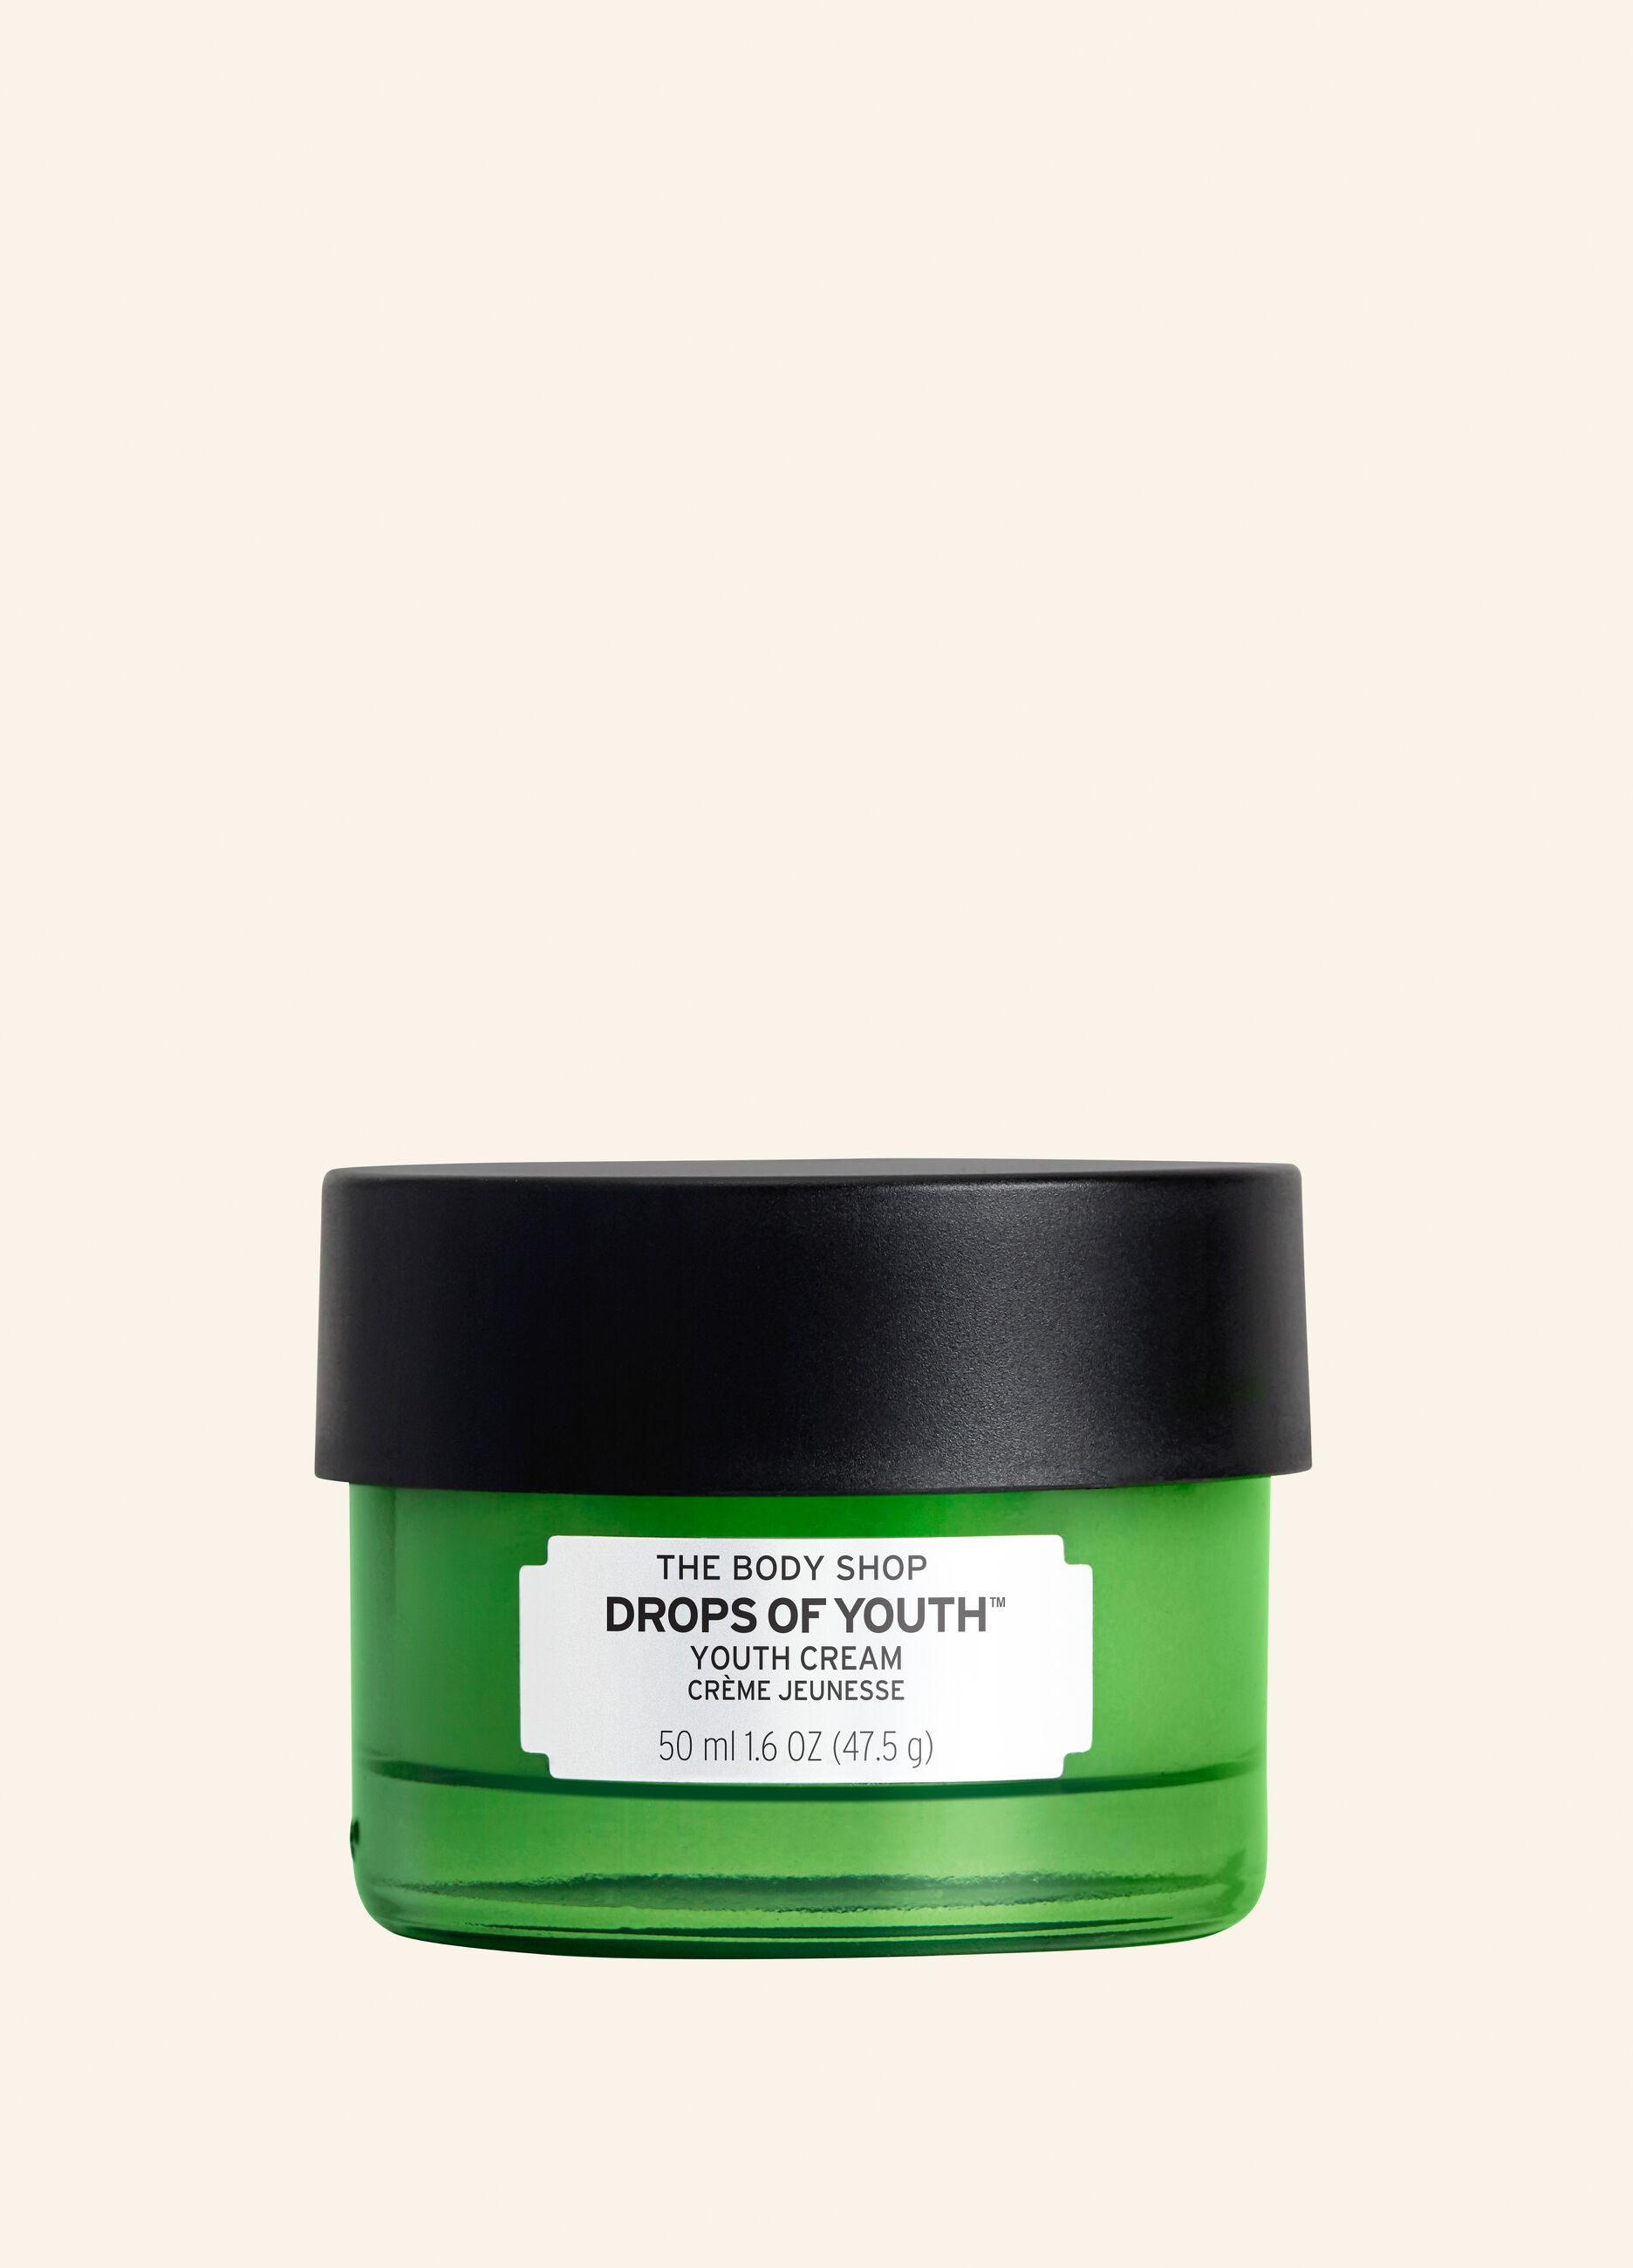 The Body Shop Drops Of Youth™ rejuvenating cream 50ml